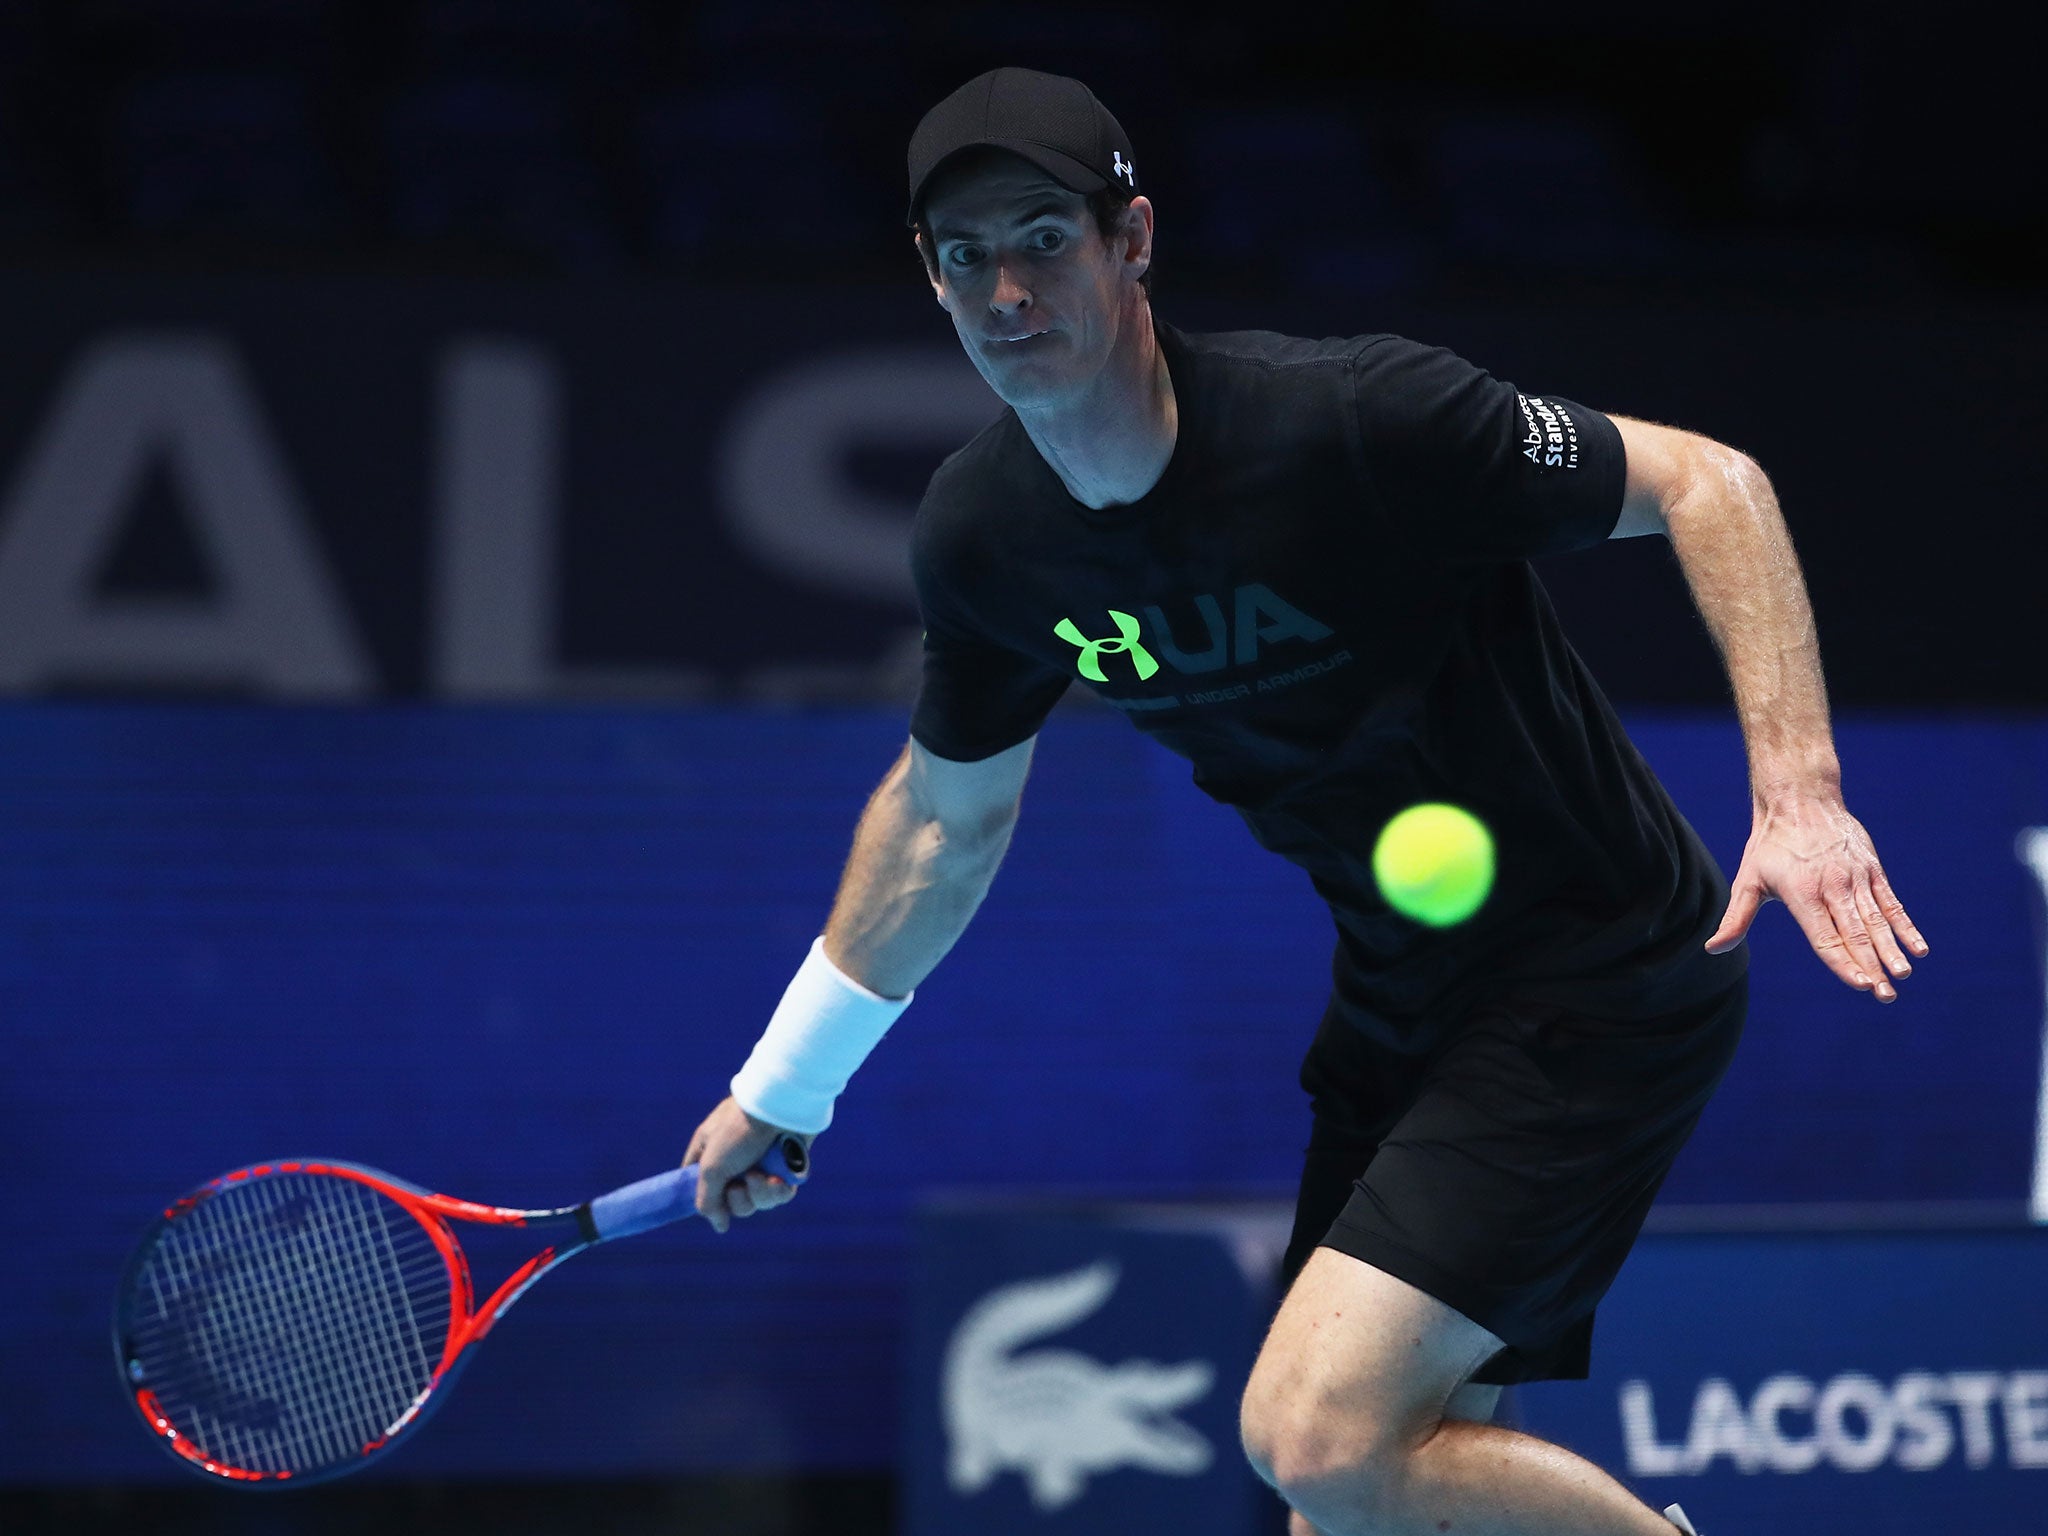 Andy Murray is looking to return to action in January after cutting short his 2017